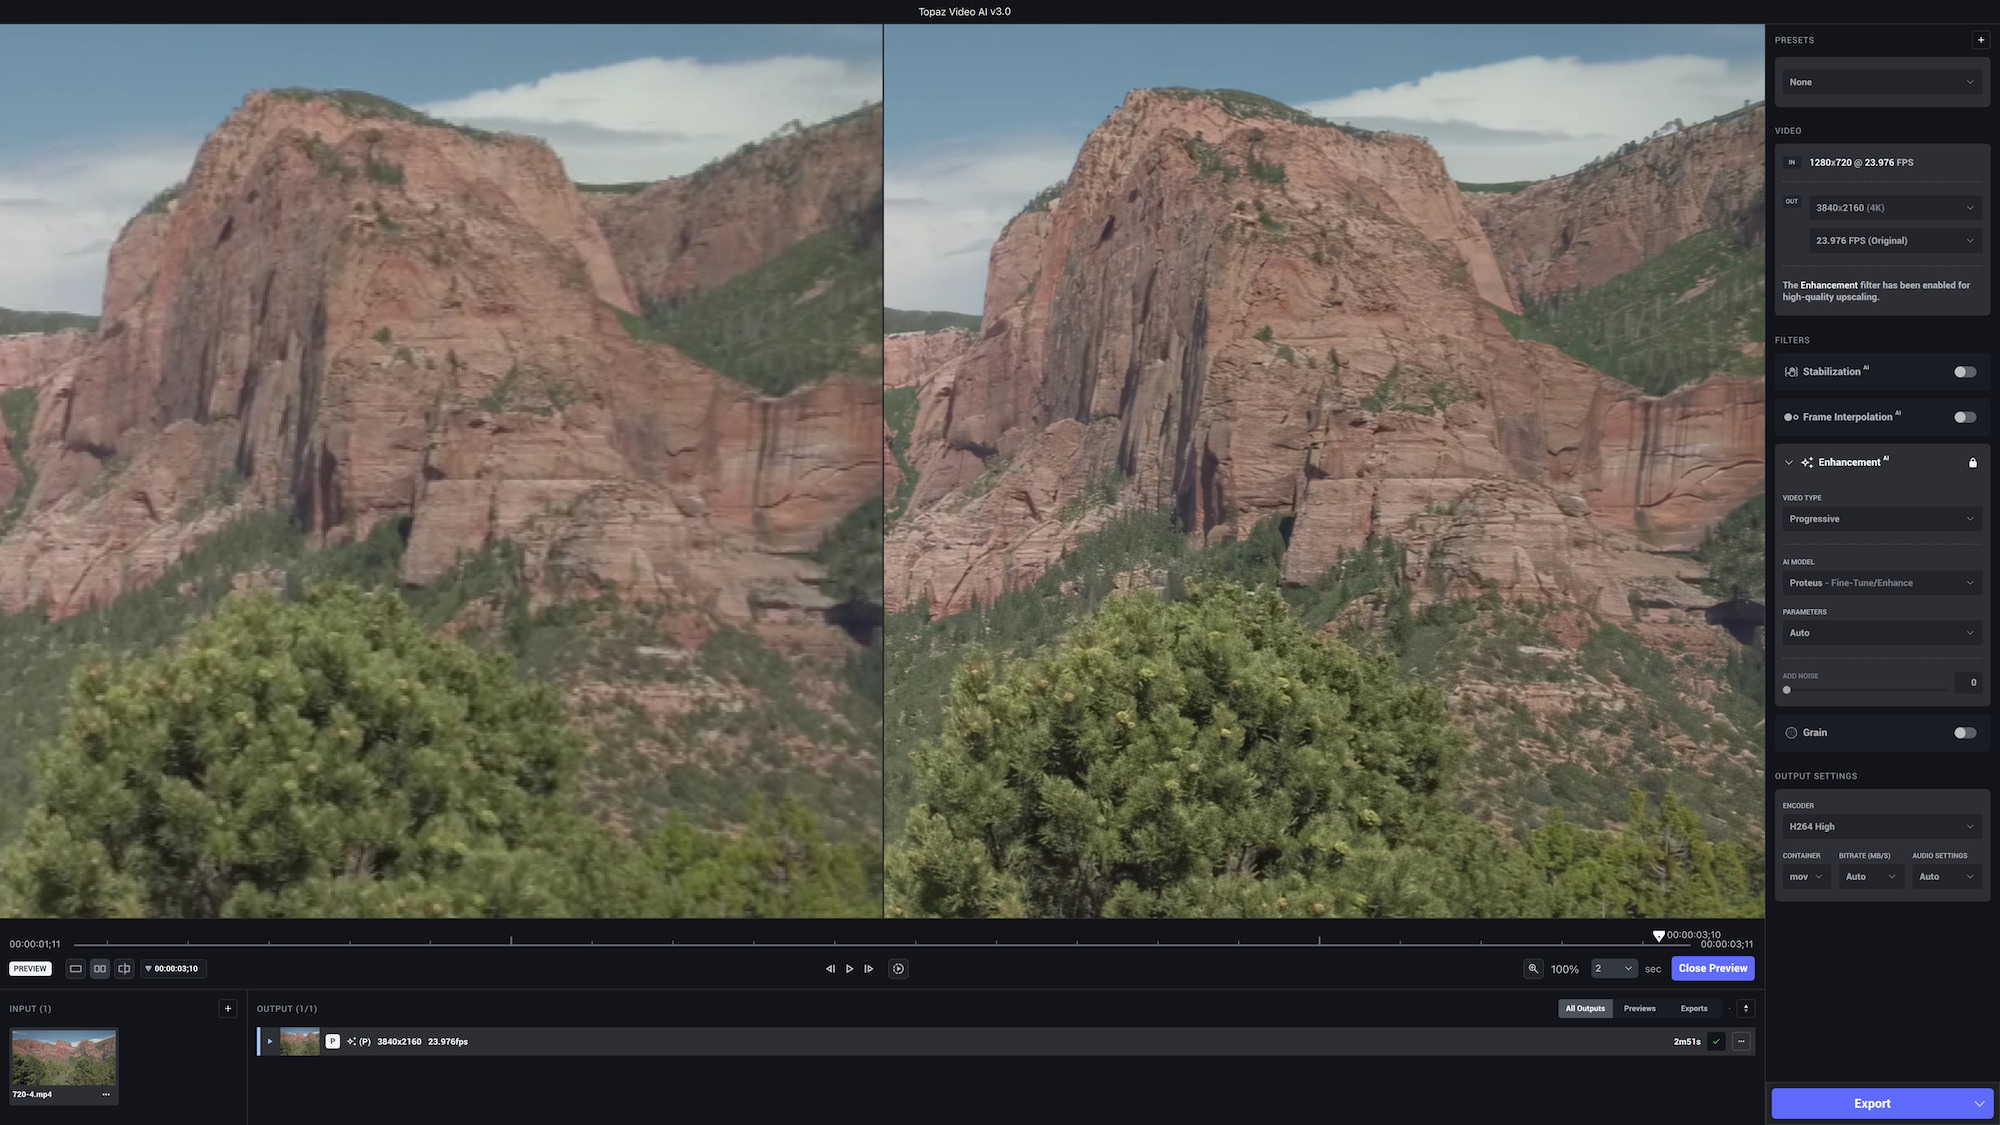 Topaz Video Enhance AI 4.0.5 Crack is a world-class video editor for your desktop that uses advanced deep learning